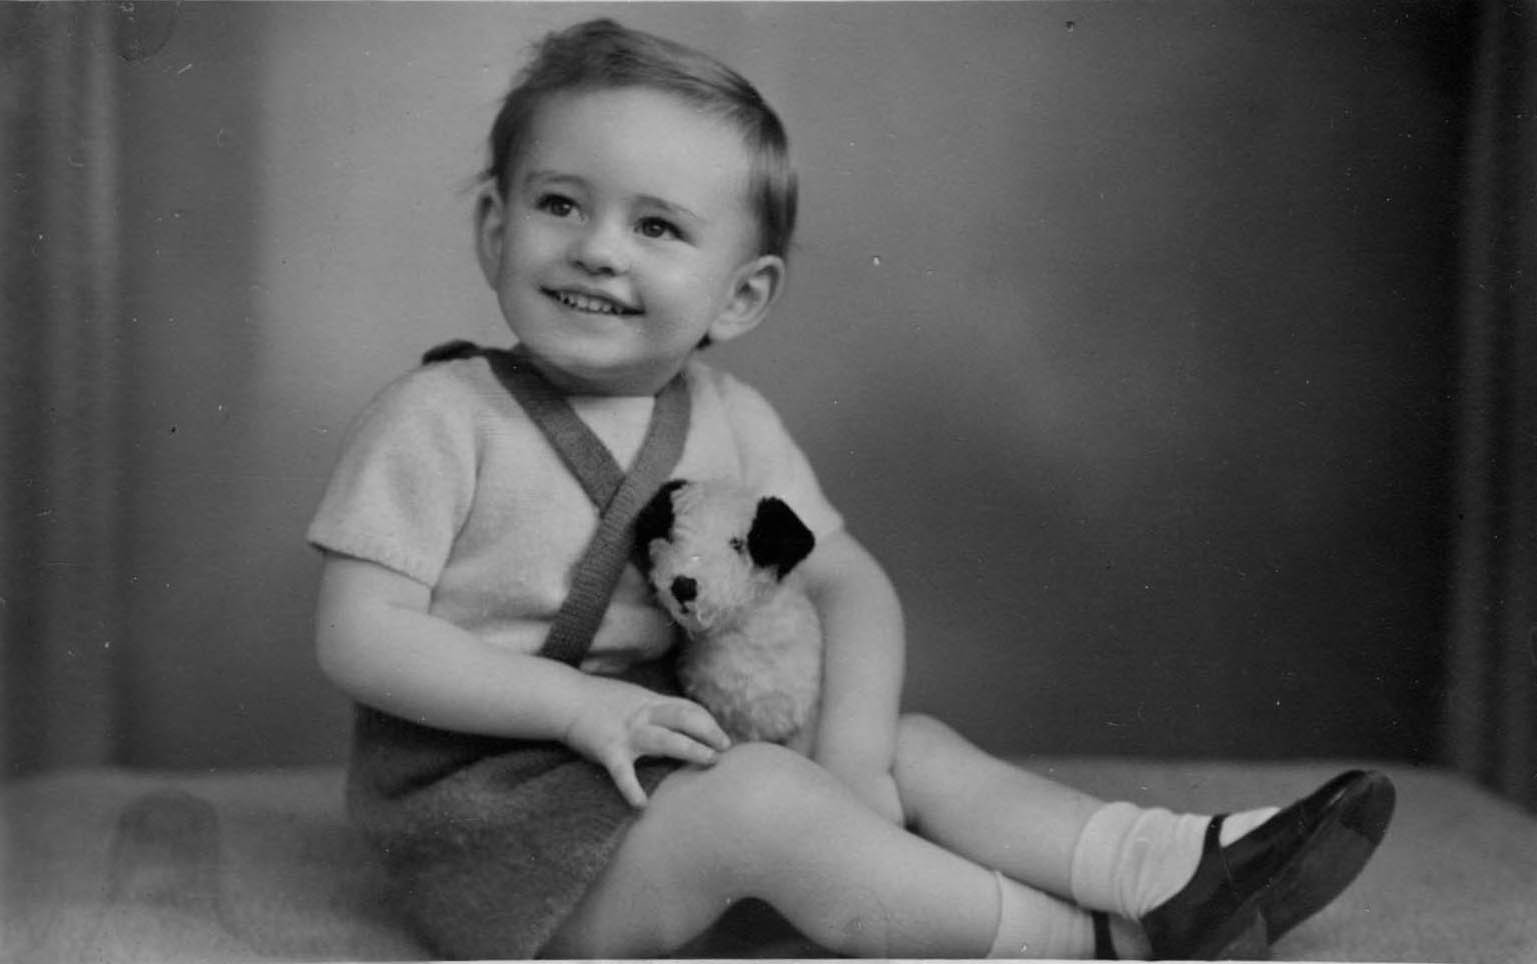 John as an extremely pretty toddler, sitting on the floor, smiling broadly and holding a black and white toy dog, and wearing a white shirt, dark shorts with braces crossed across his chest and black patent shoes with white socks